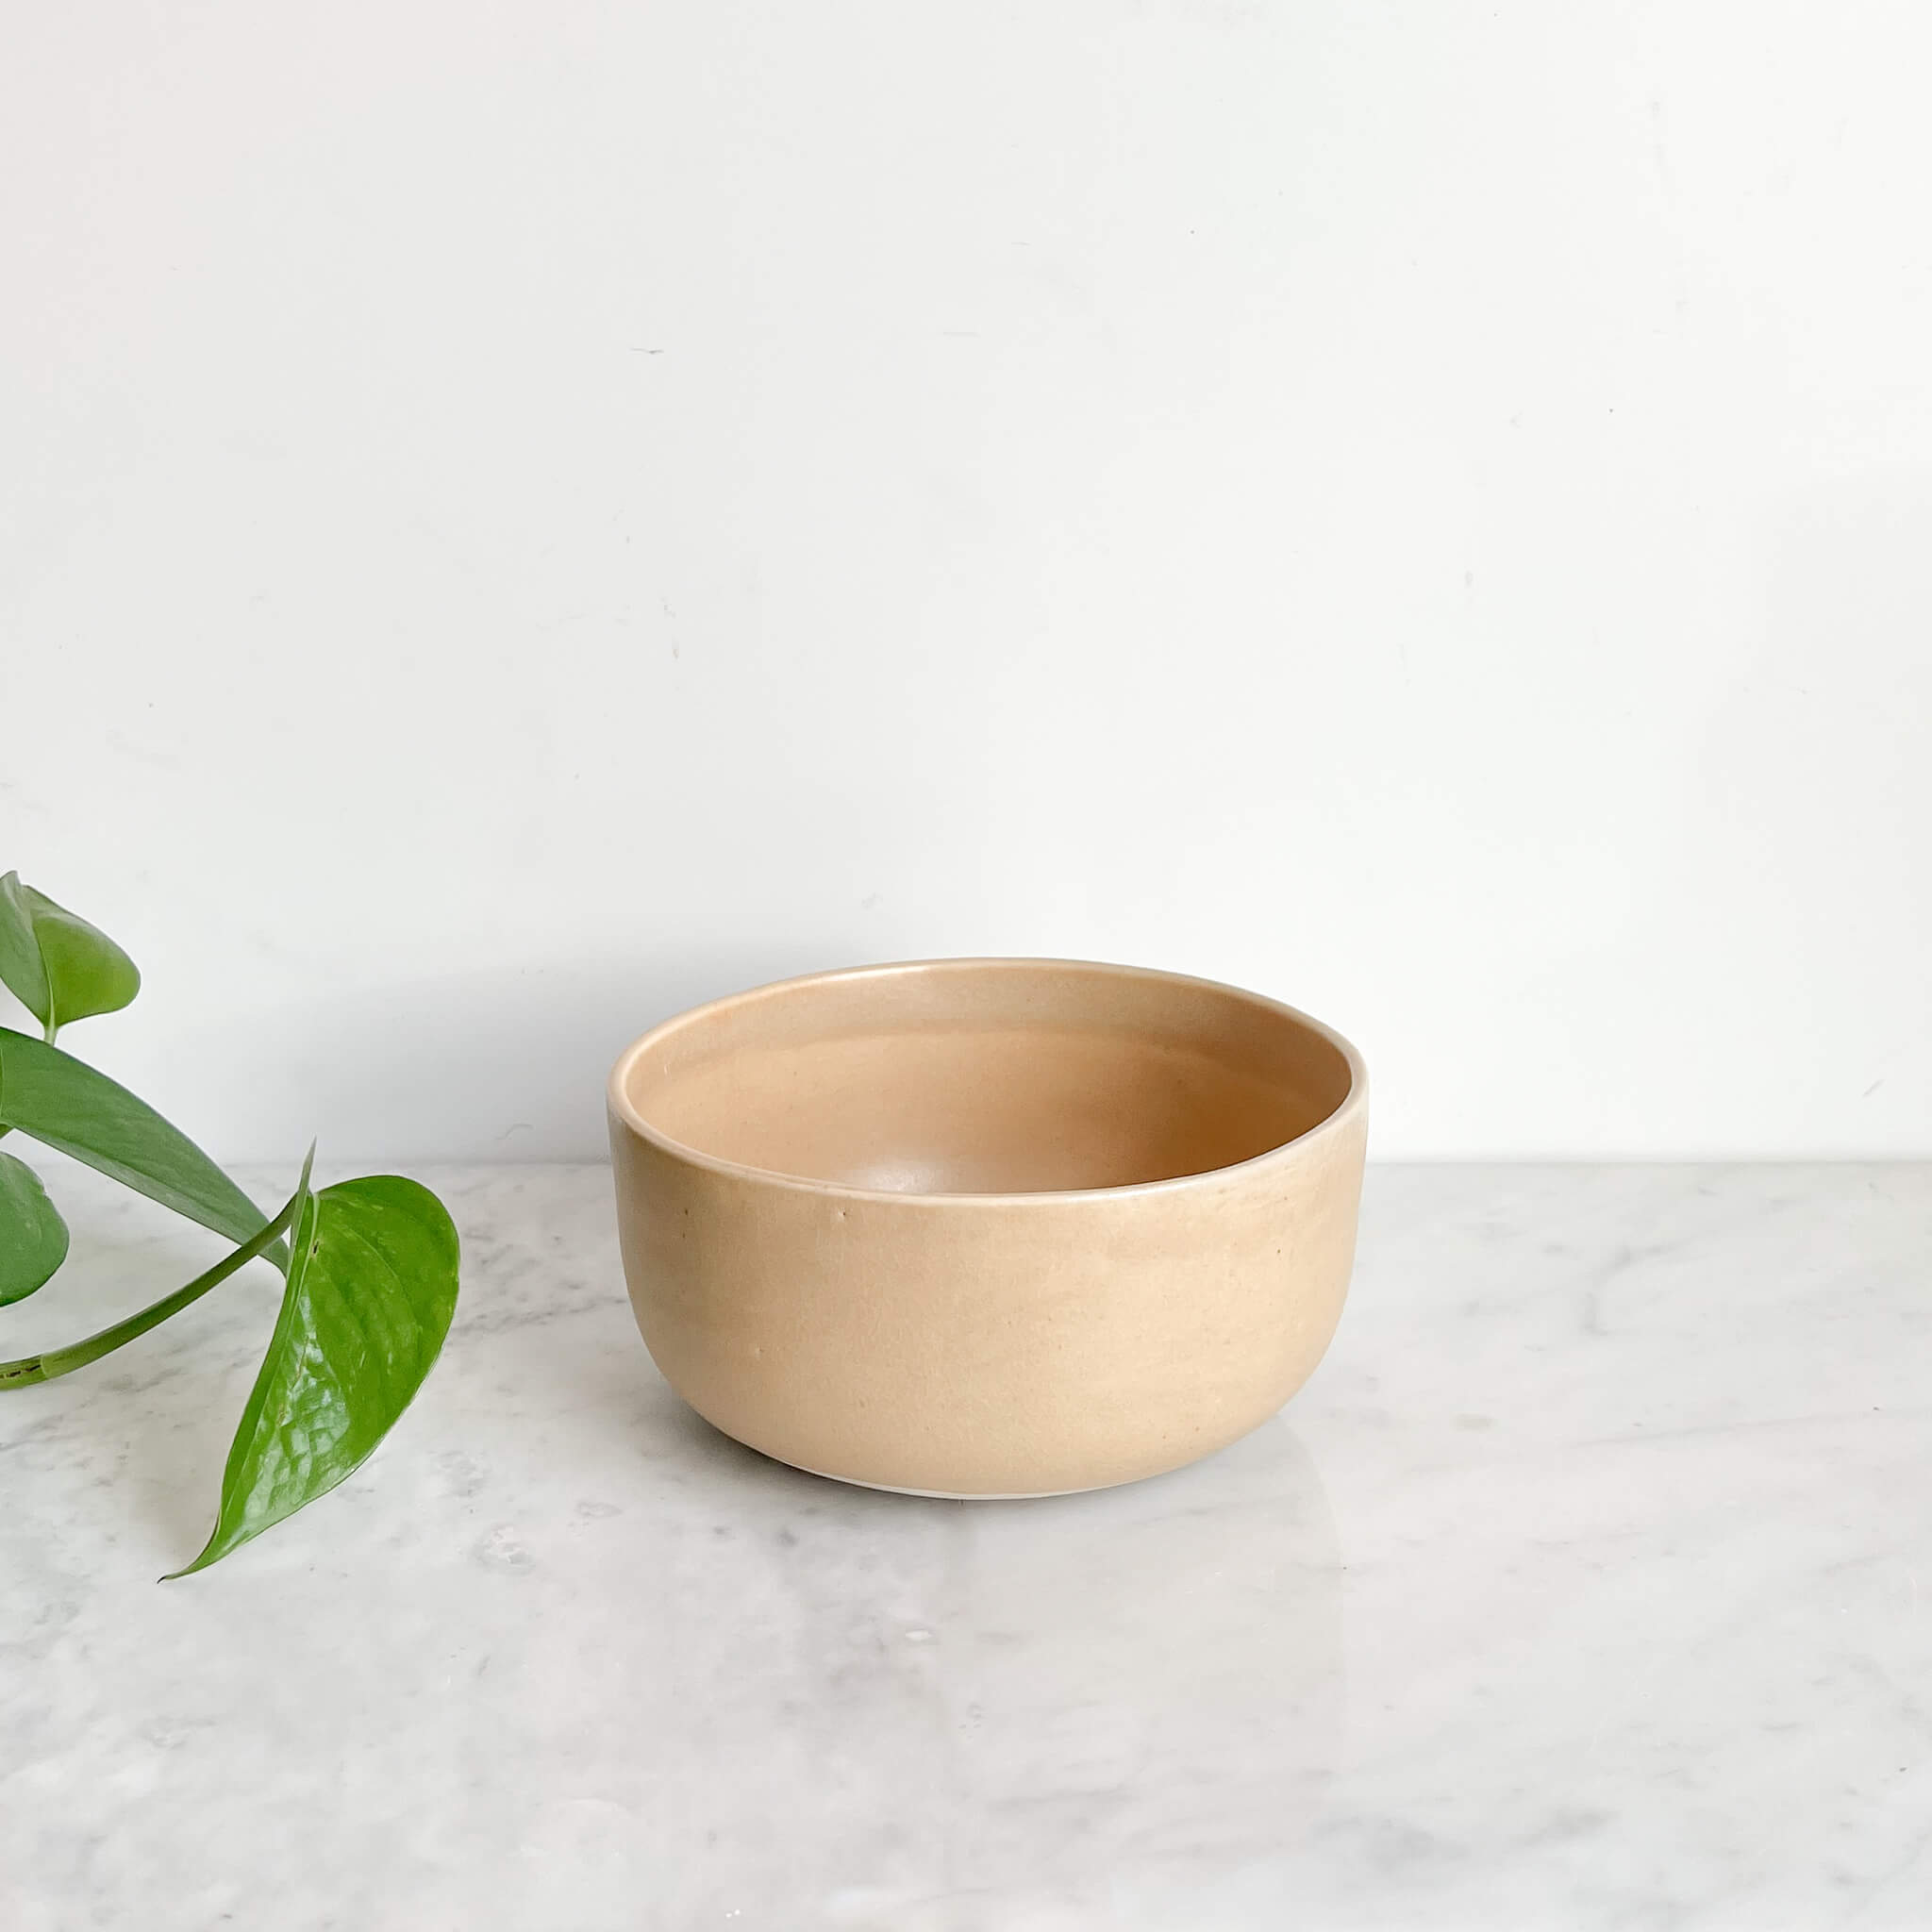 A sandy ivory colored stoneware serving bowl on a white marble counter next to a small sprig of green.